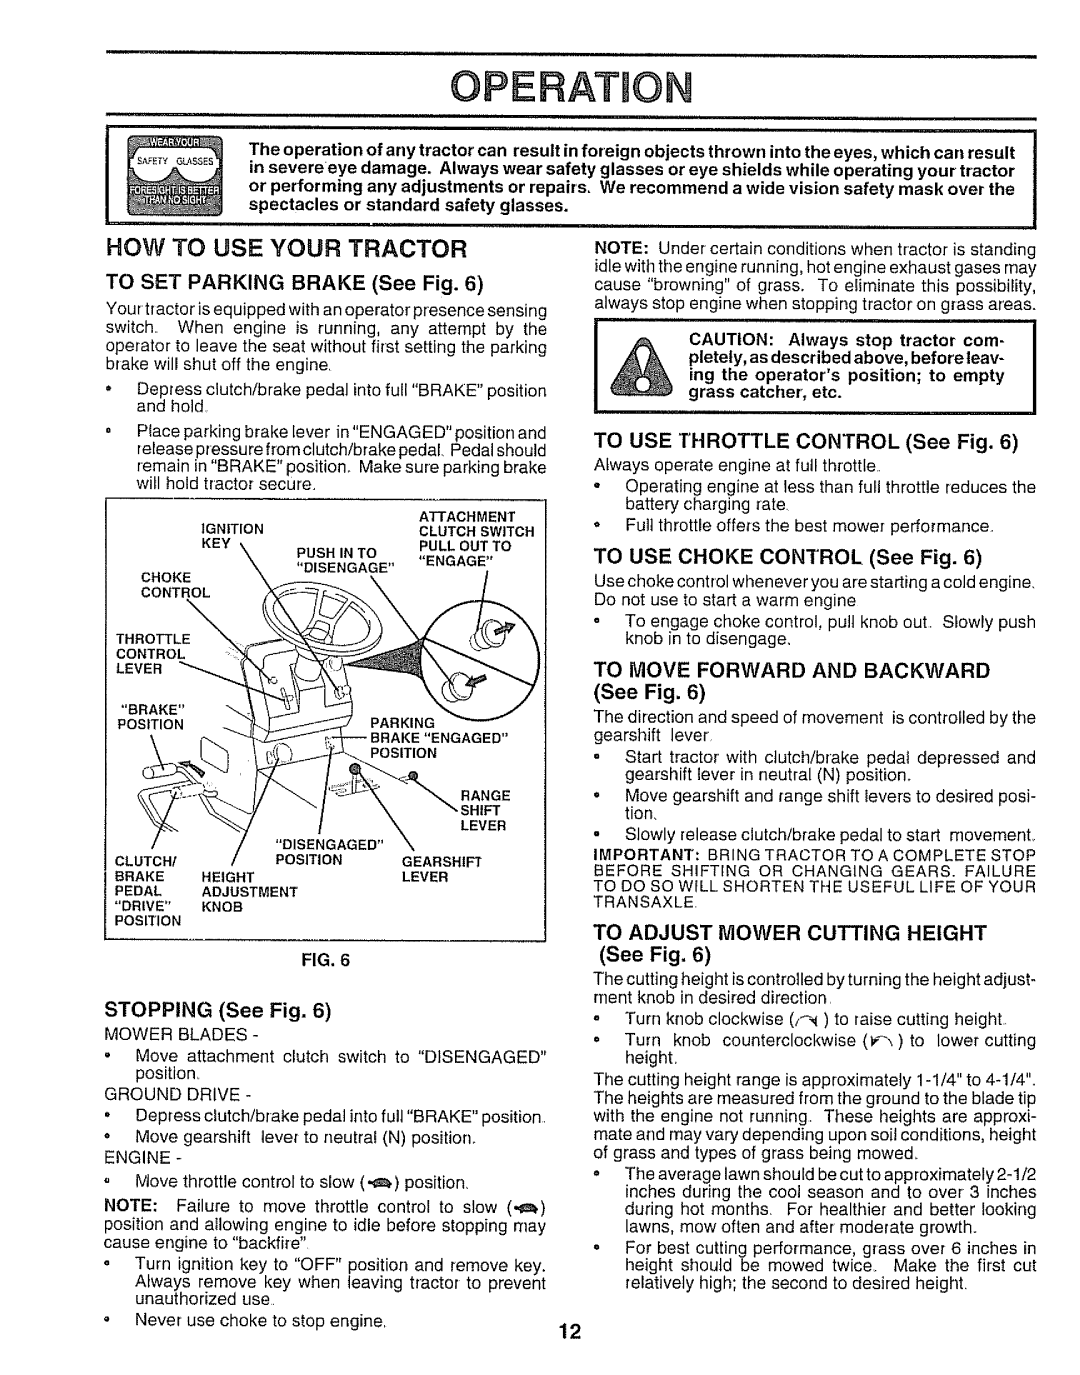 Sears 917.250551 Operation, How To Use Your Tractor, TO MOVE FORWARD AND BACKWARD See Fig, Stopping, Turn ignition key 